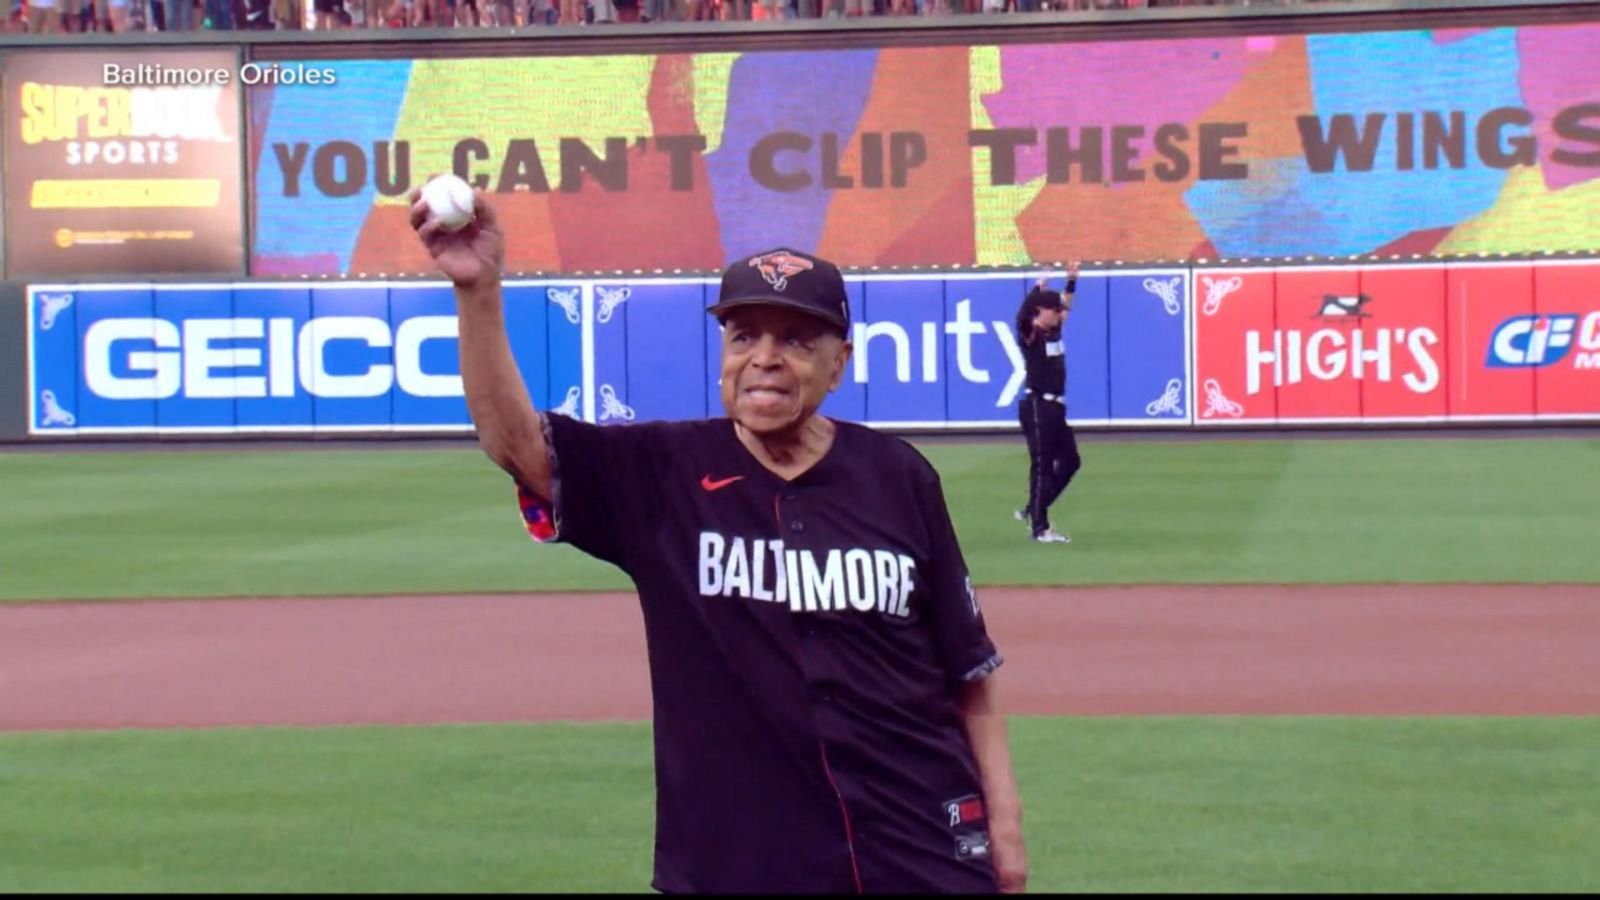 106-year-old throws first pitch at baseball game